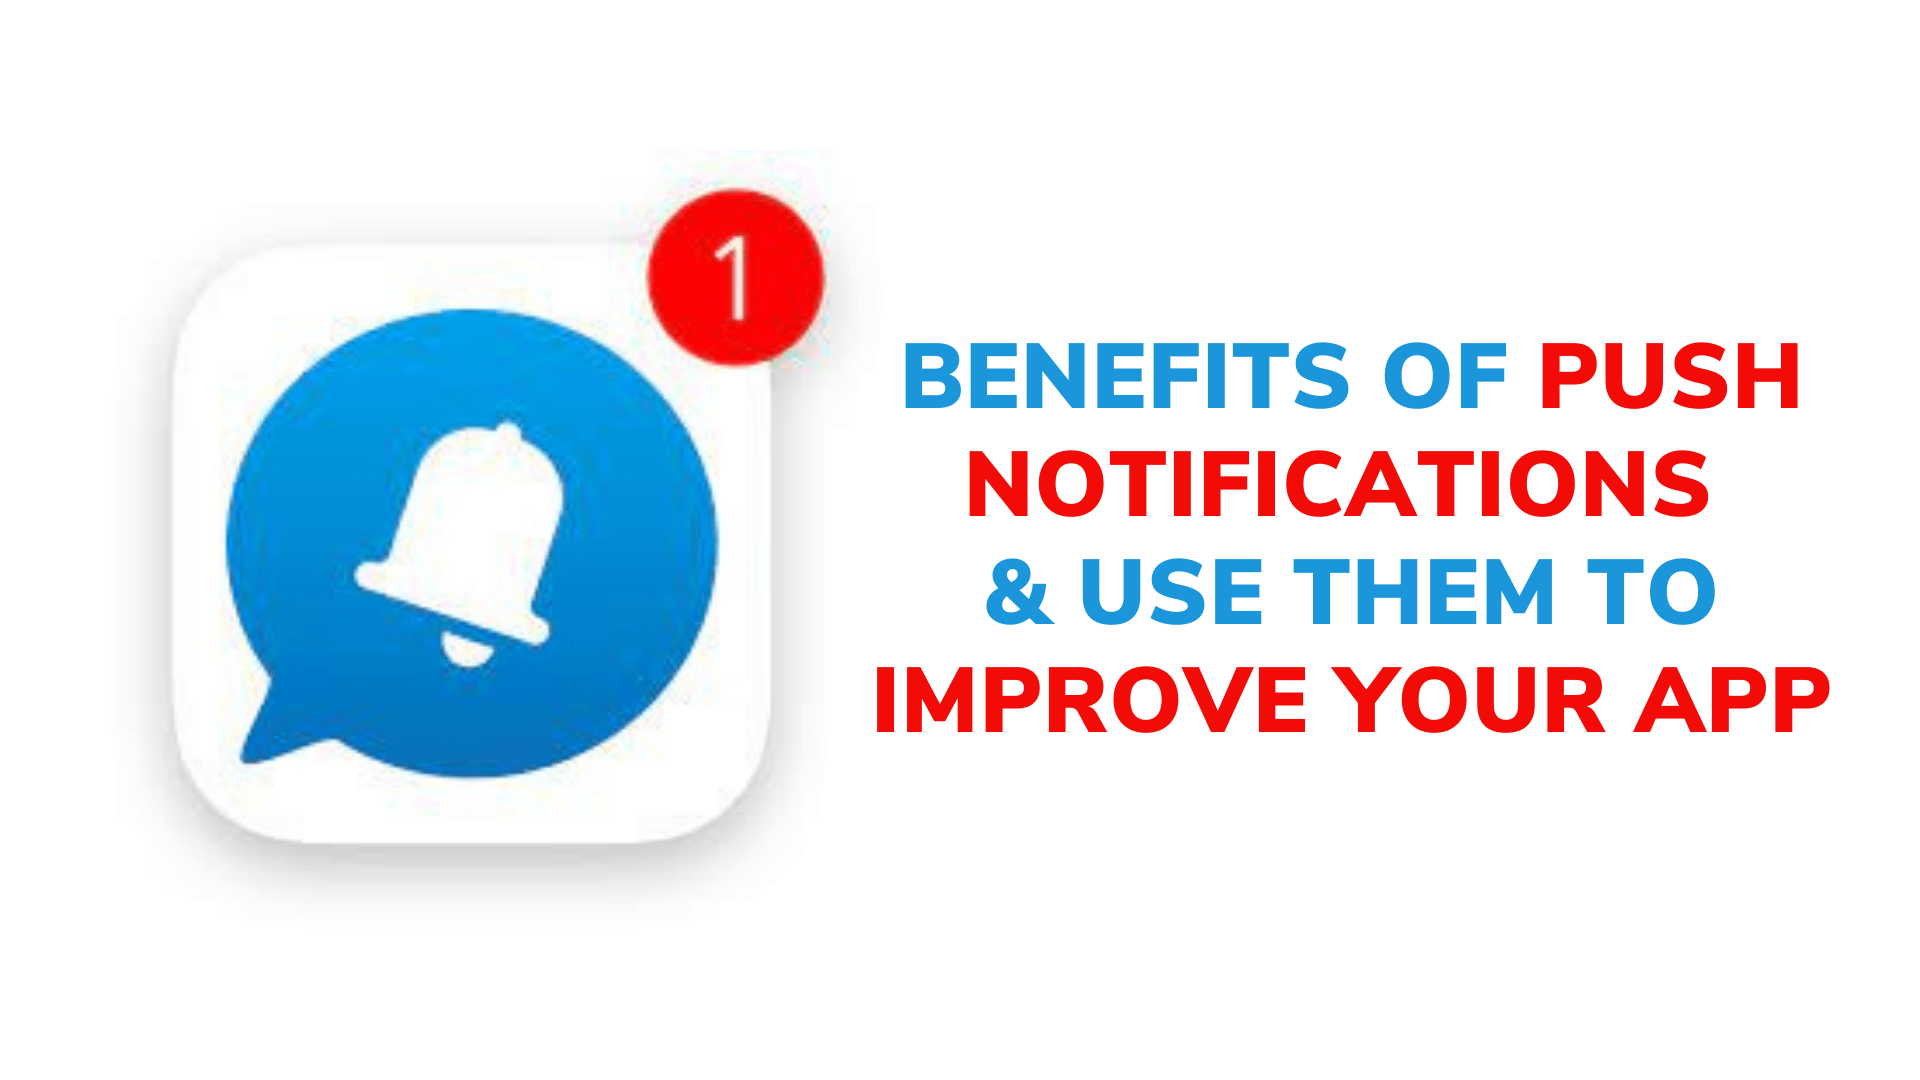 Benefits of Push Notifications Use Them to Improve Your App